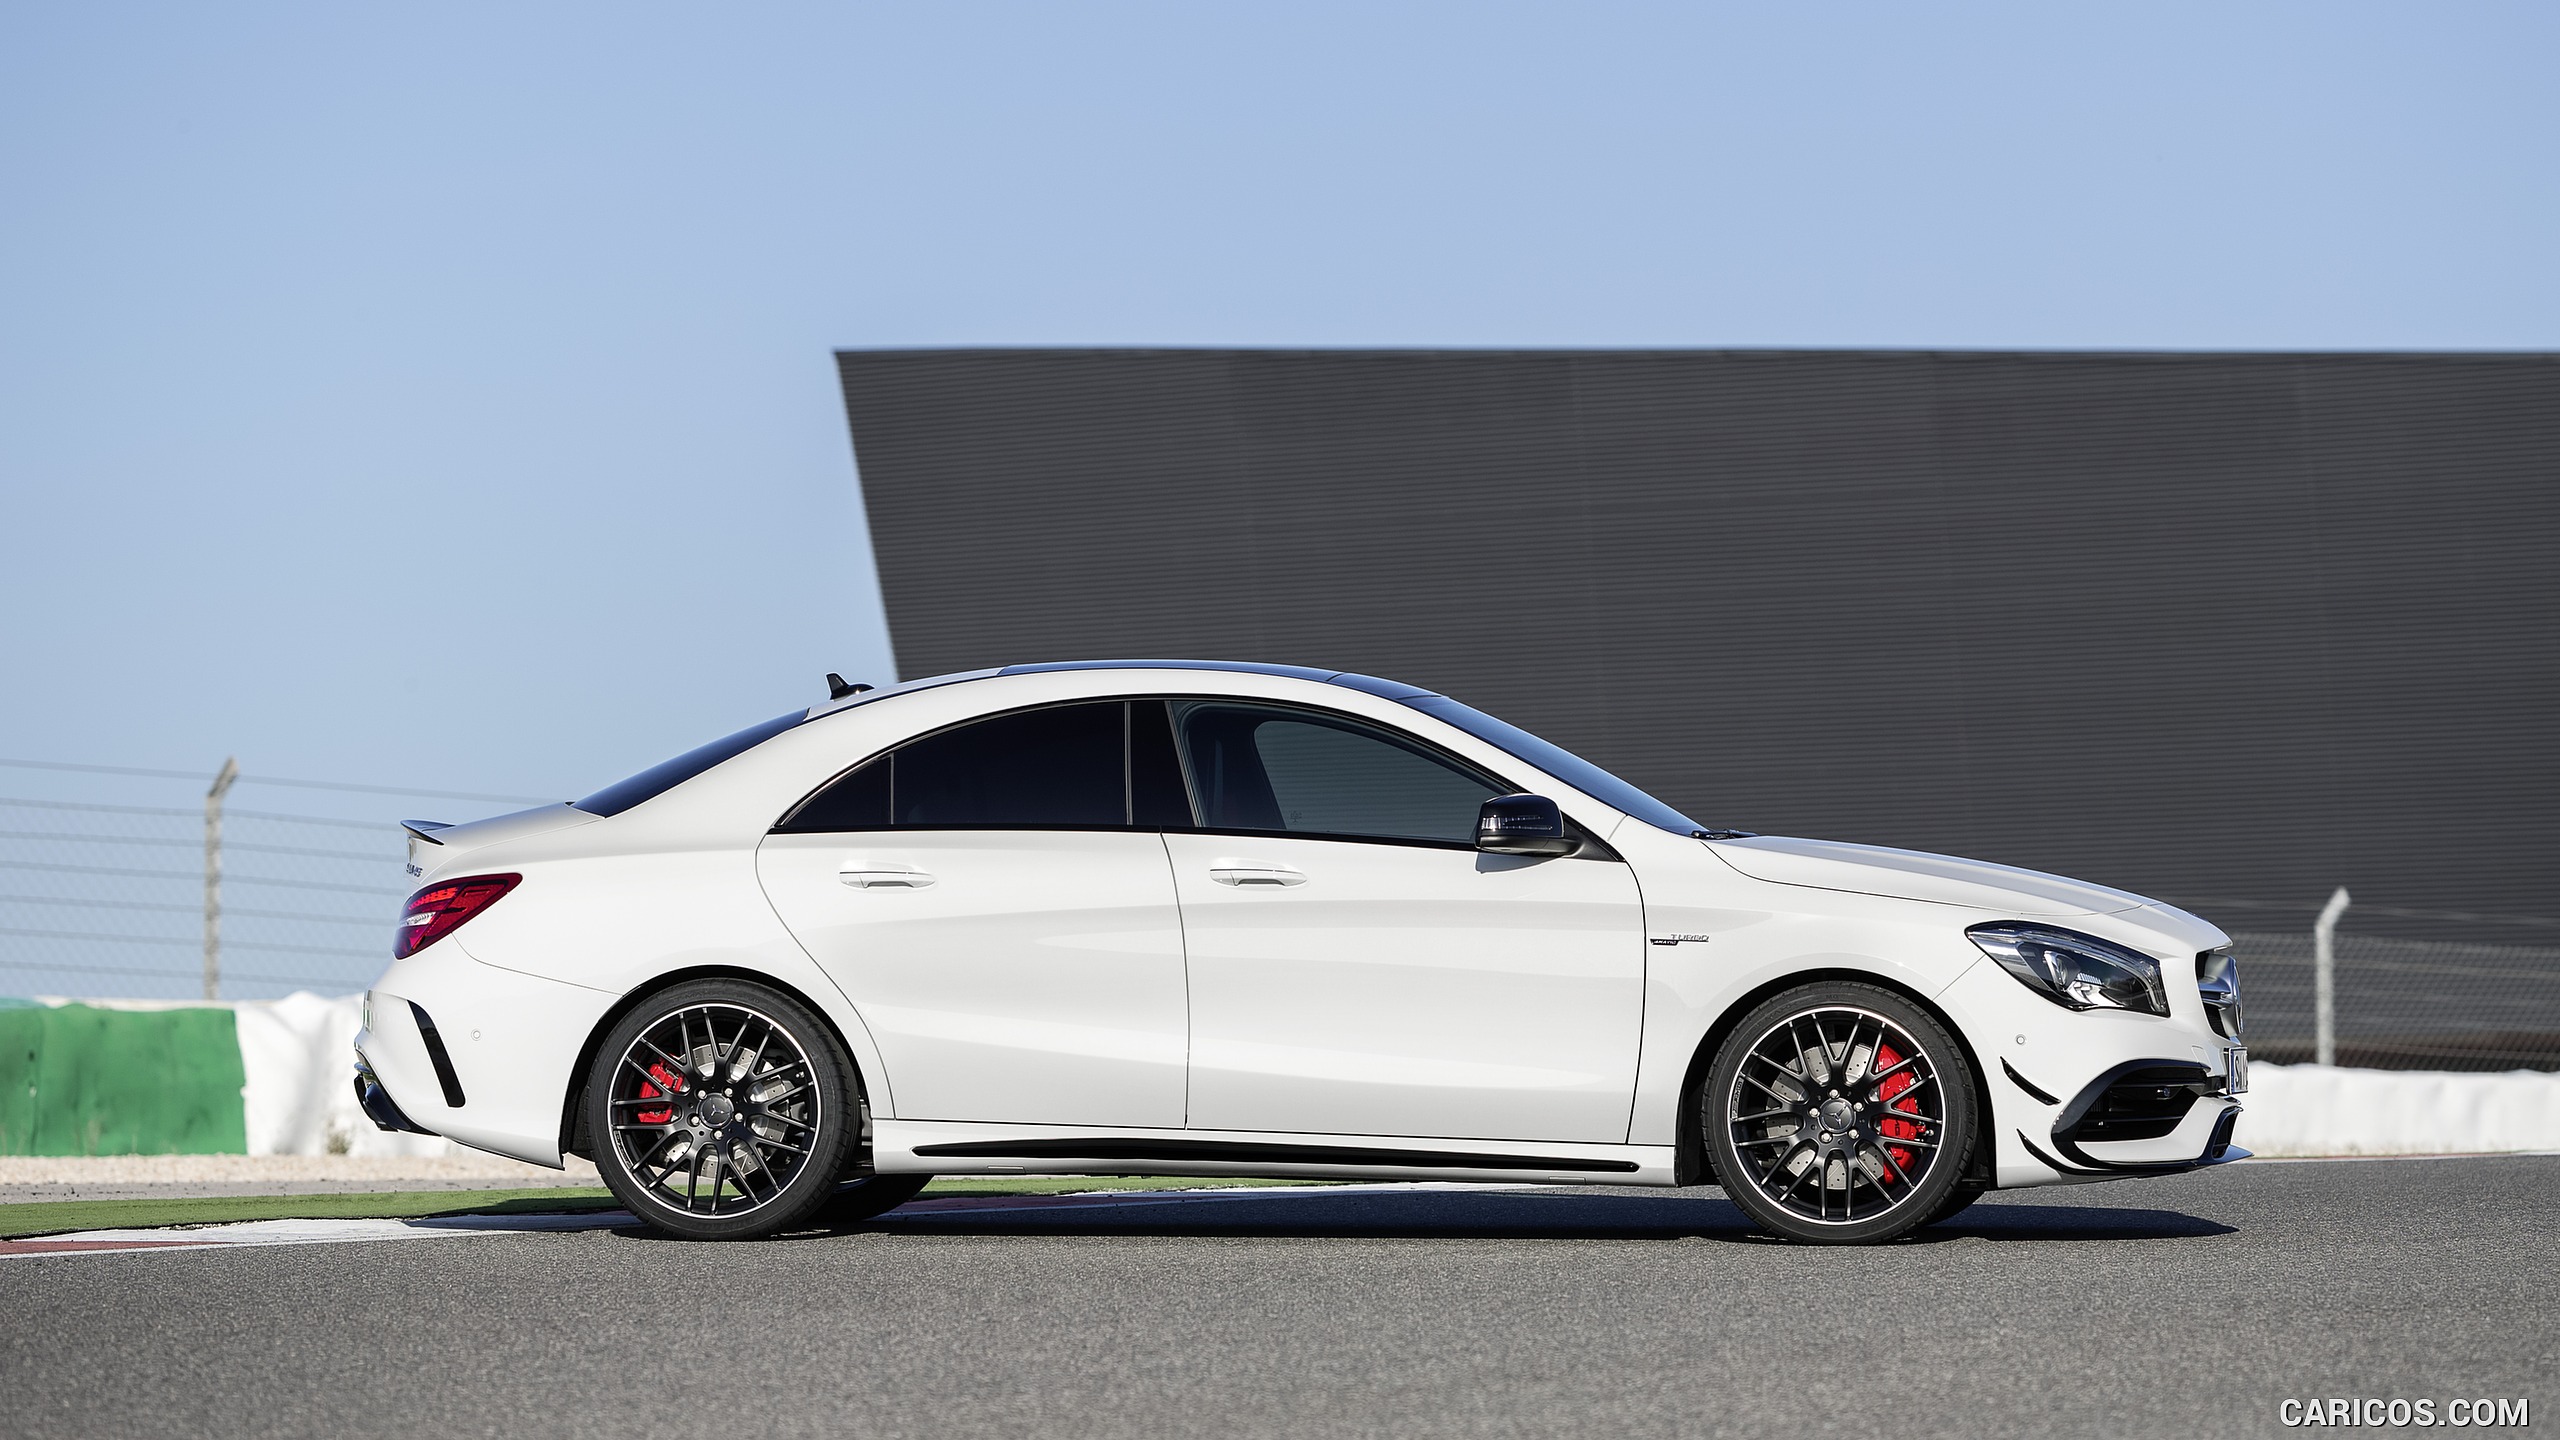 2017 Mercedes-AMG CLA 45 Coupé with Aerodynamics Package (Chassis: C117, Color: Diamond White) - Side, #7 of 11